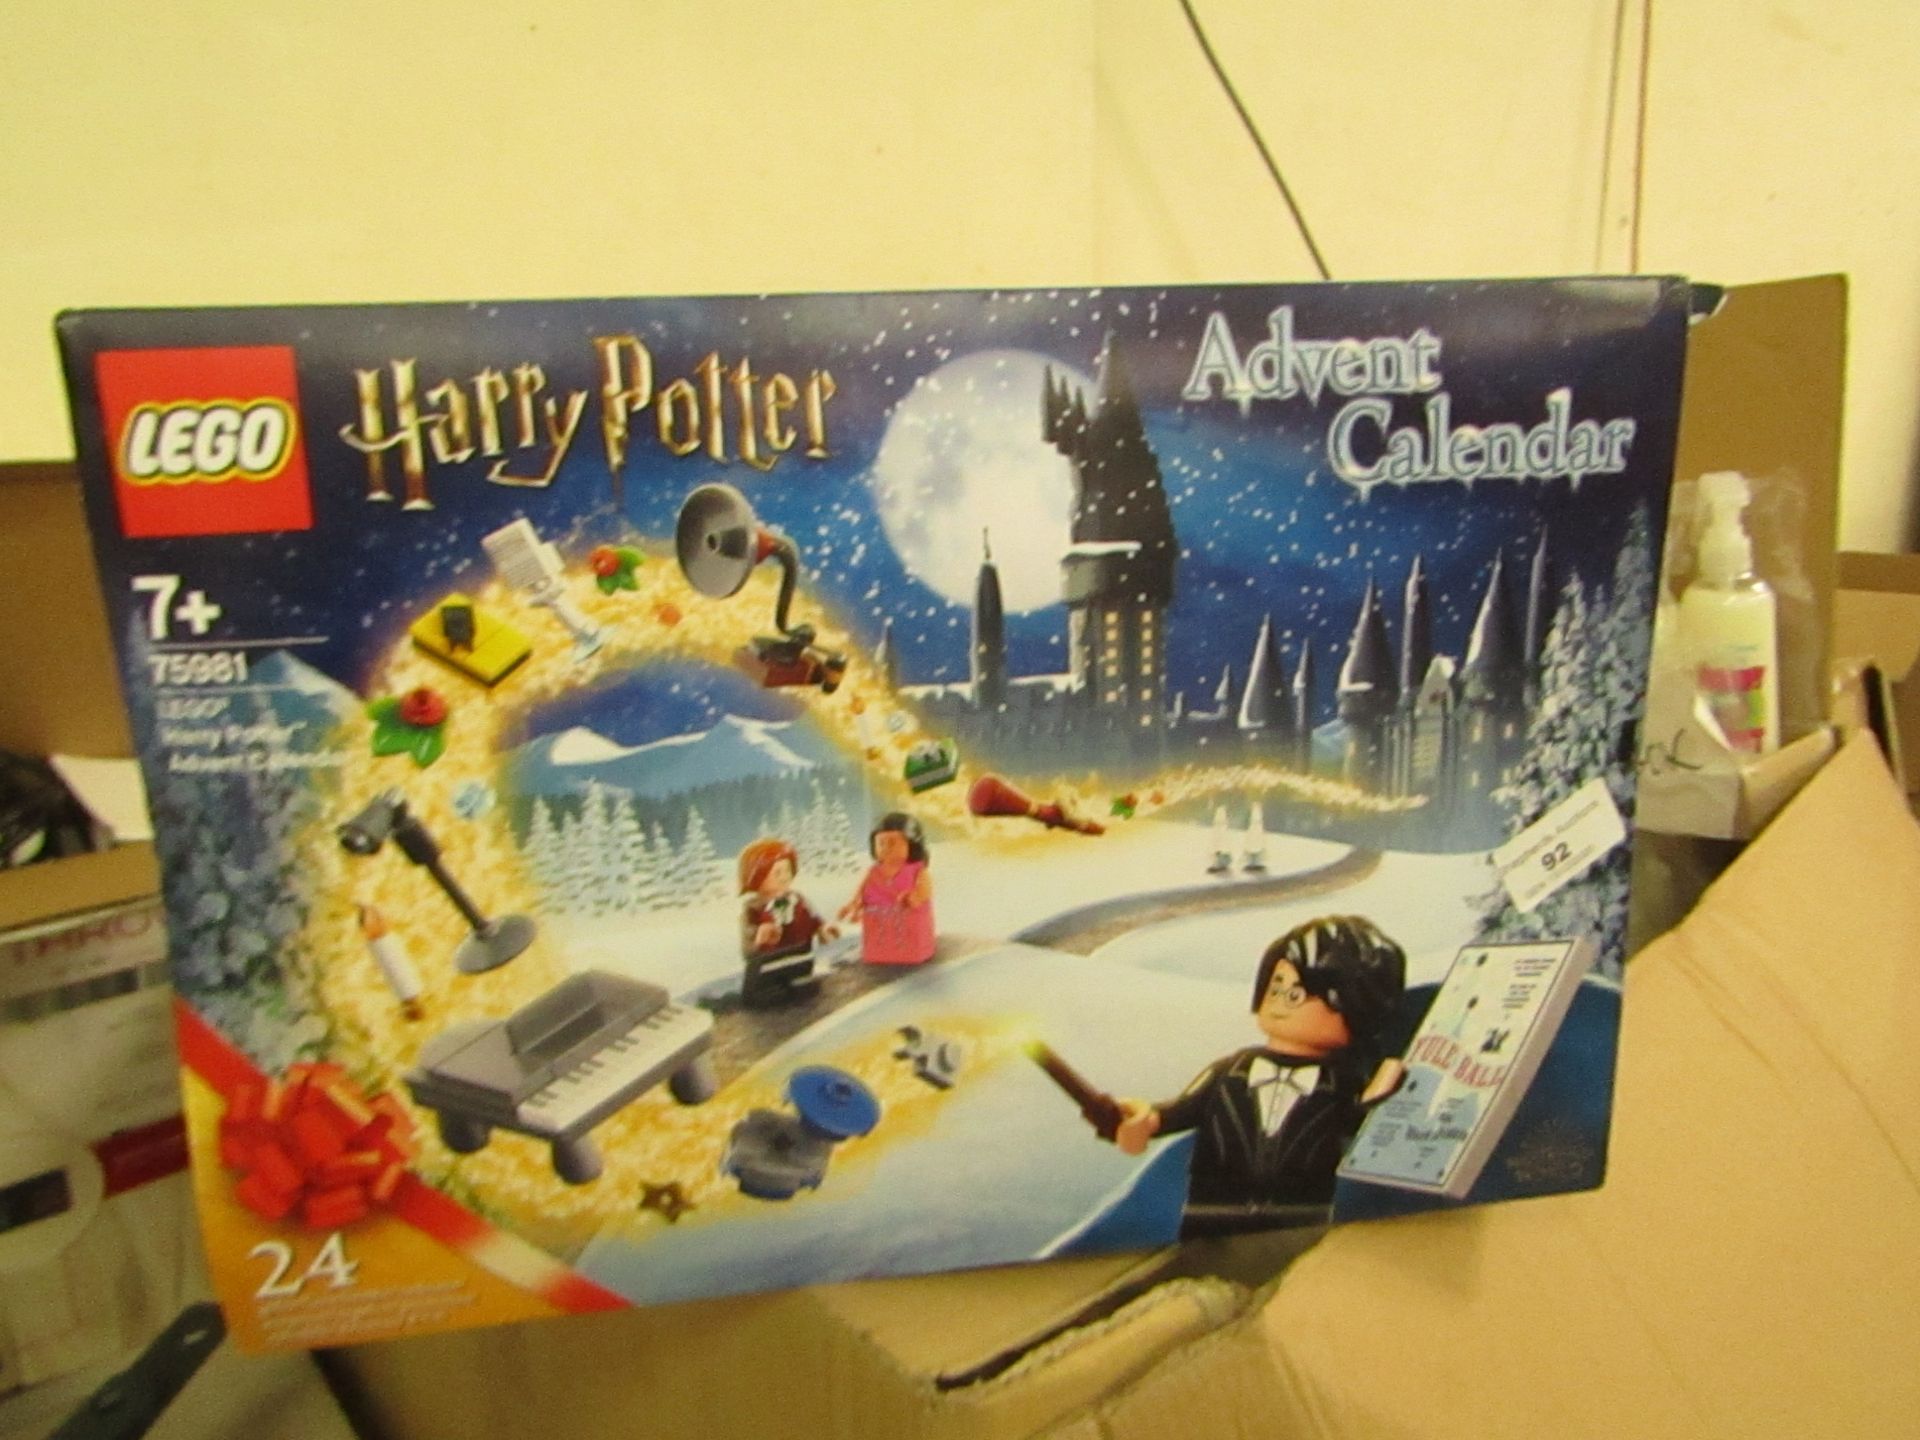 Lego Harry Potter Advebt Calendar. Box is slightly damaged but products are still sealed